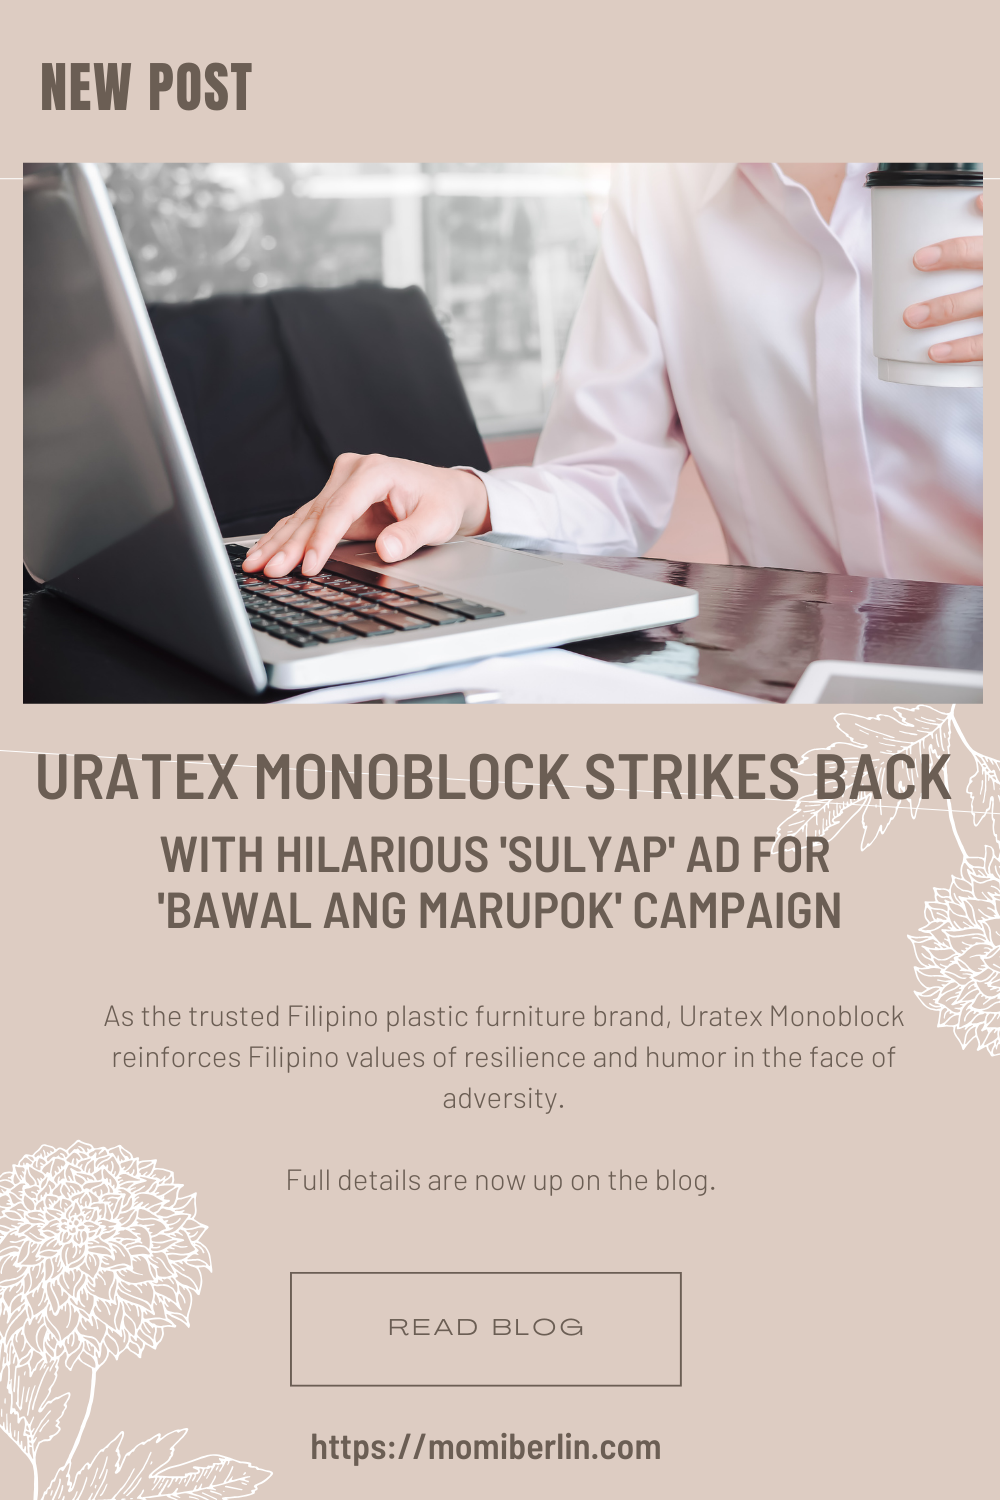 Uratex Monoblock Strikes Back with Hilarious 'Sulyap' Ad for 'Bawal ang Marupok' Campaign